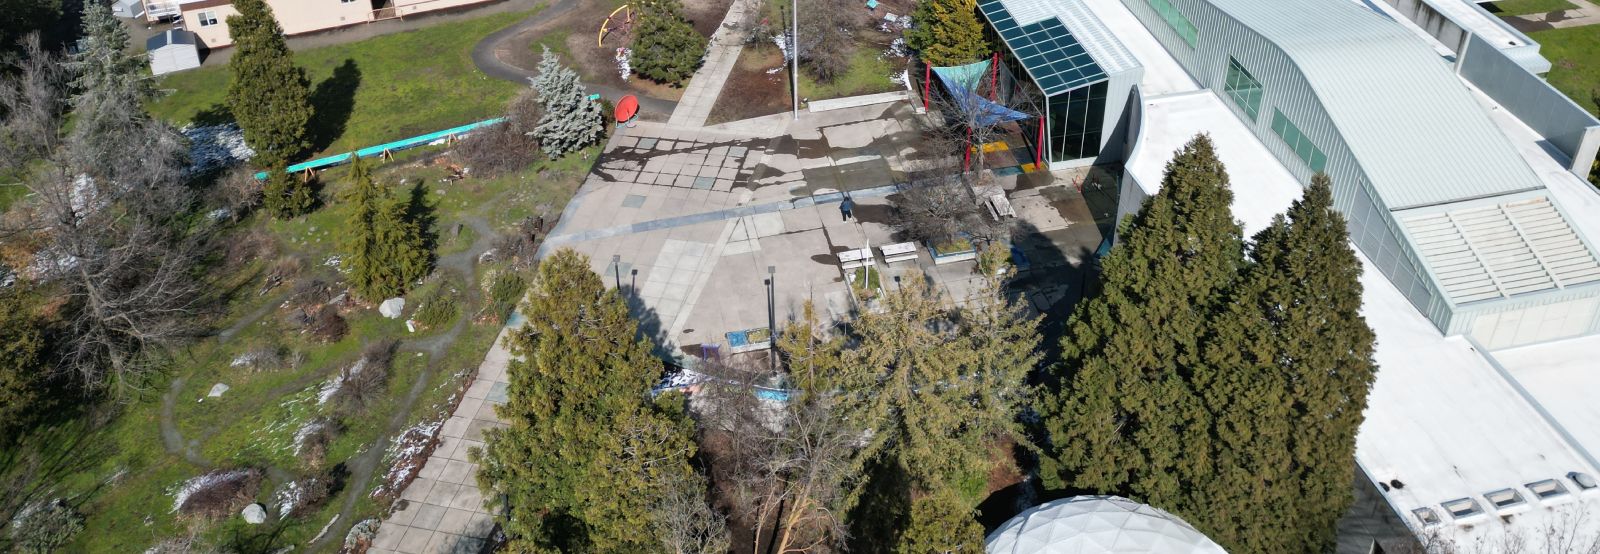 ScienceWorks Plaza seen from the air